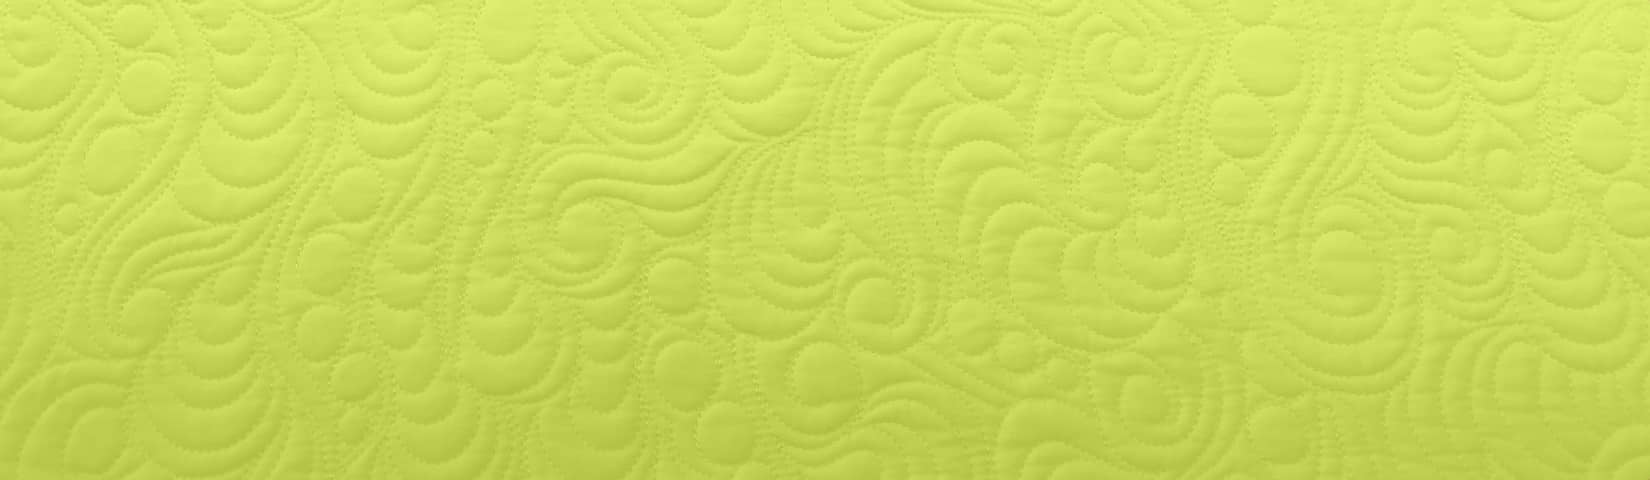 Texture of quilting on a chartreuse background